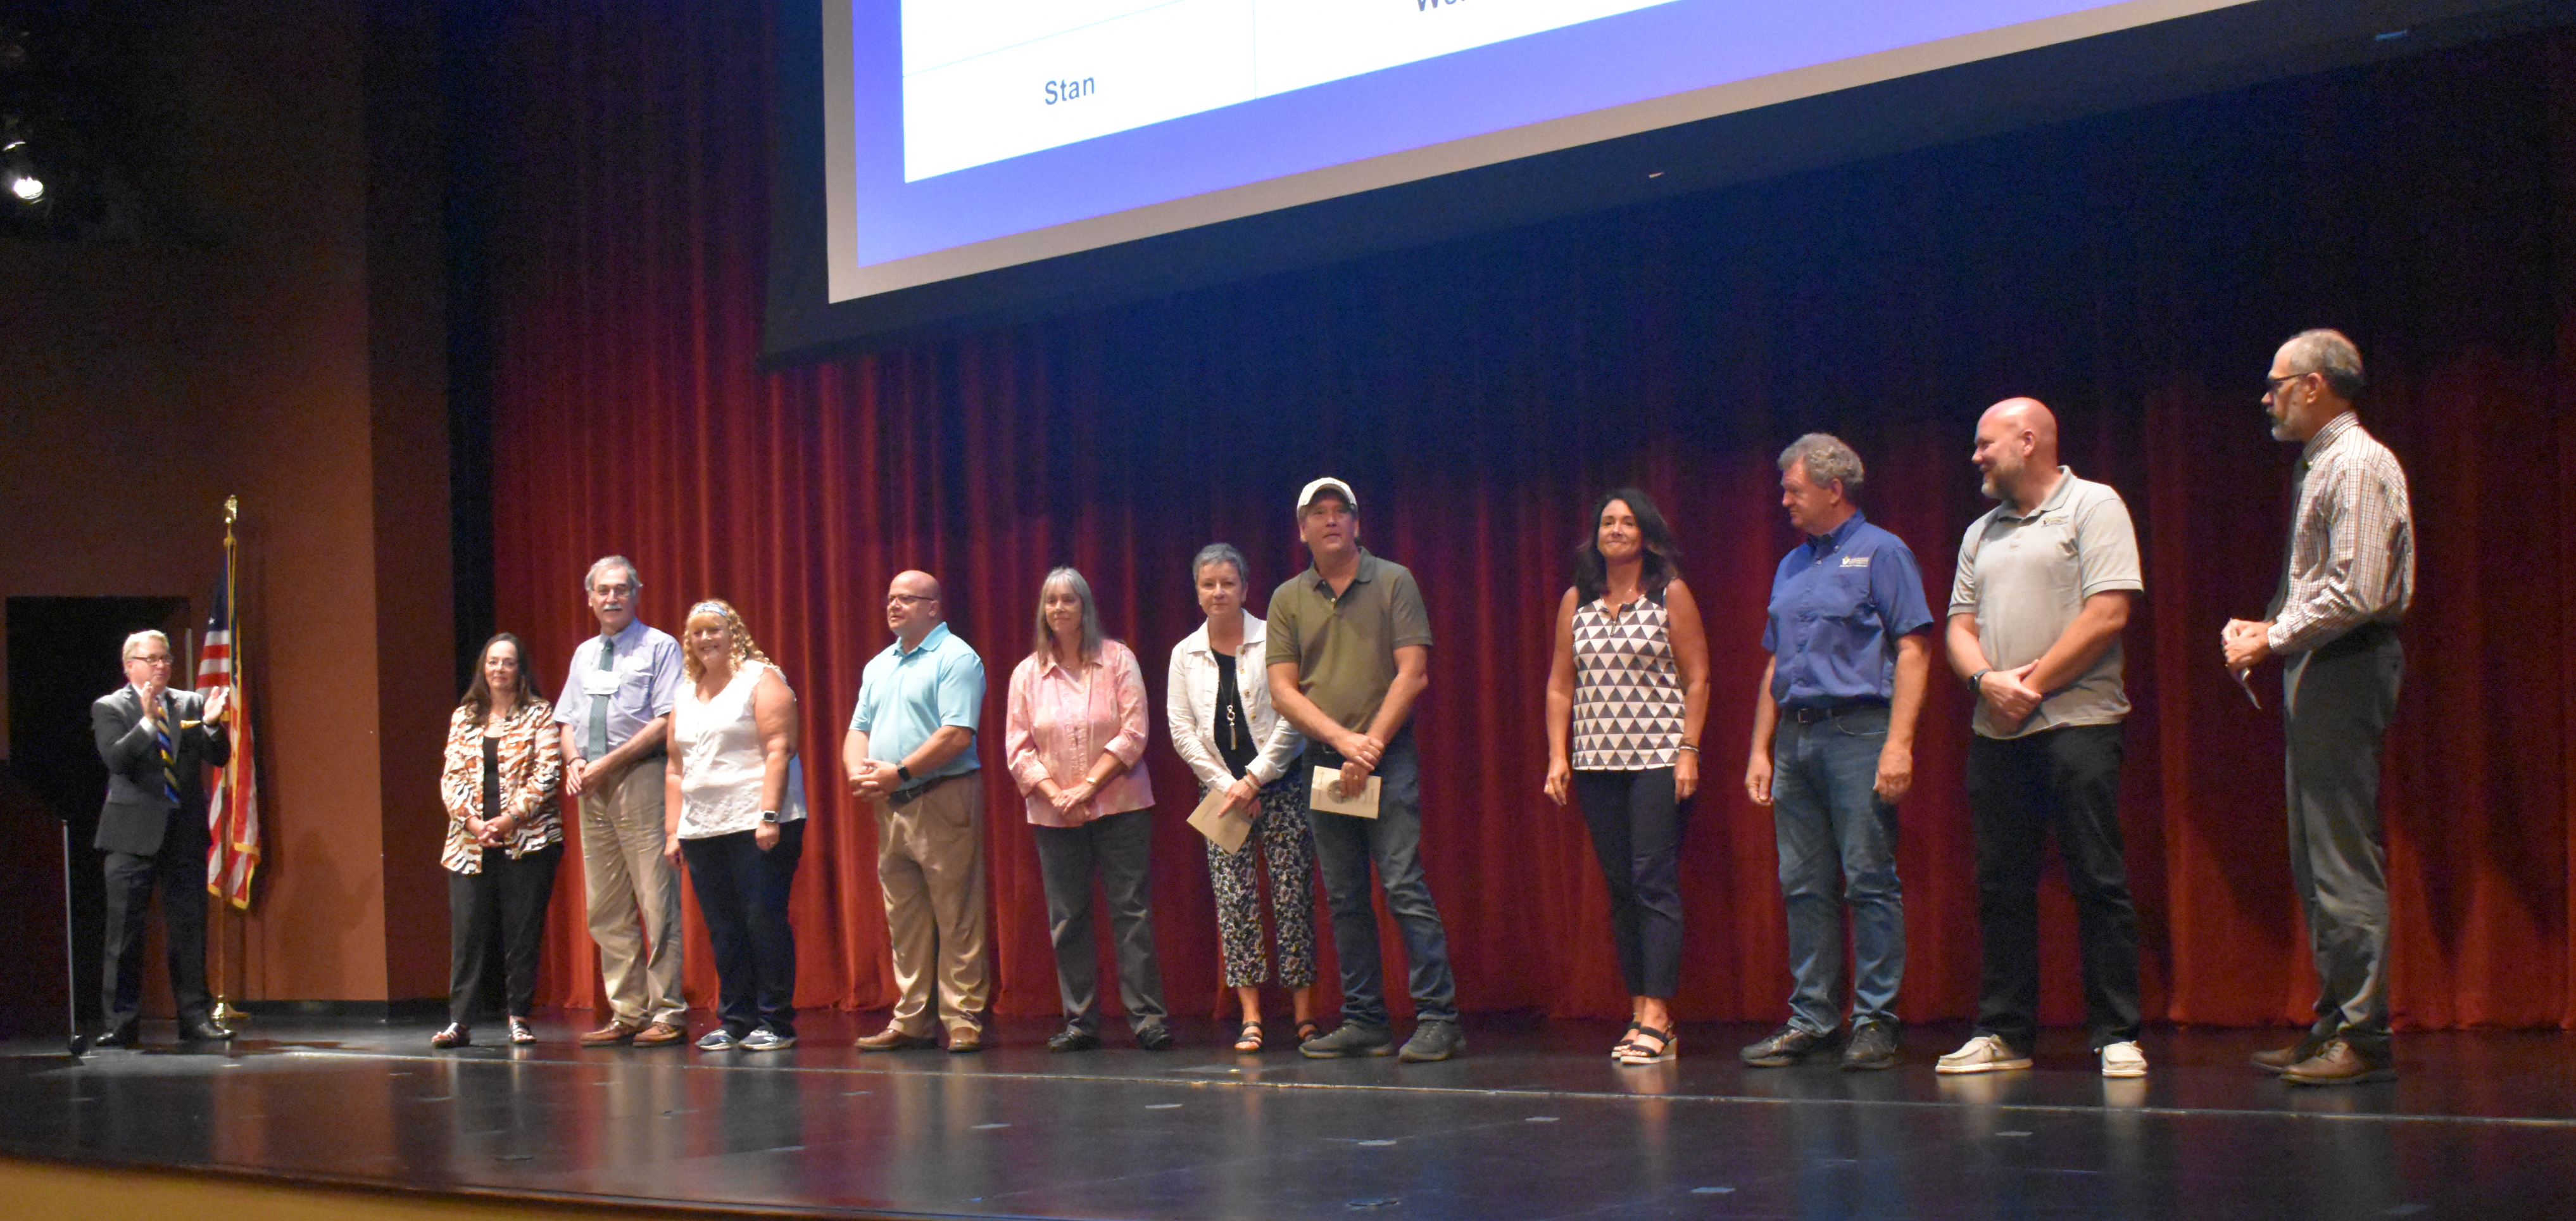 Several VU faculty and staff were invited to the RSPAC stage and saluted for their longtime service to the University.